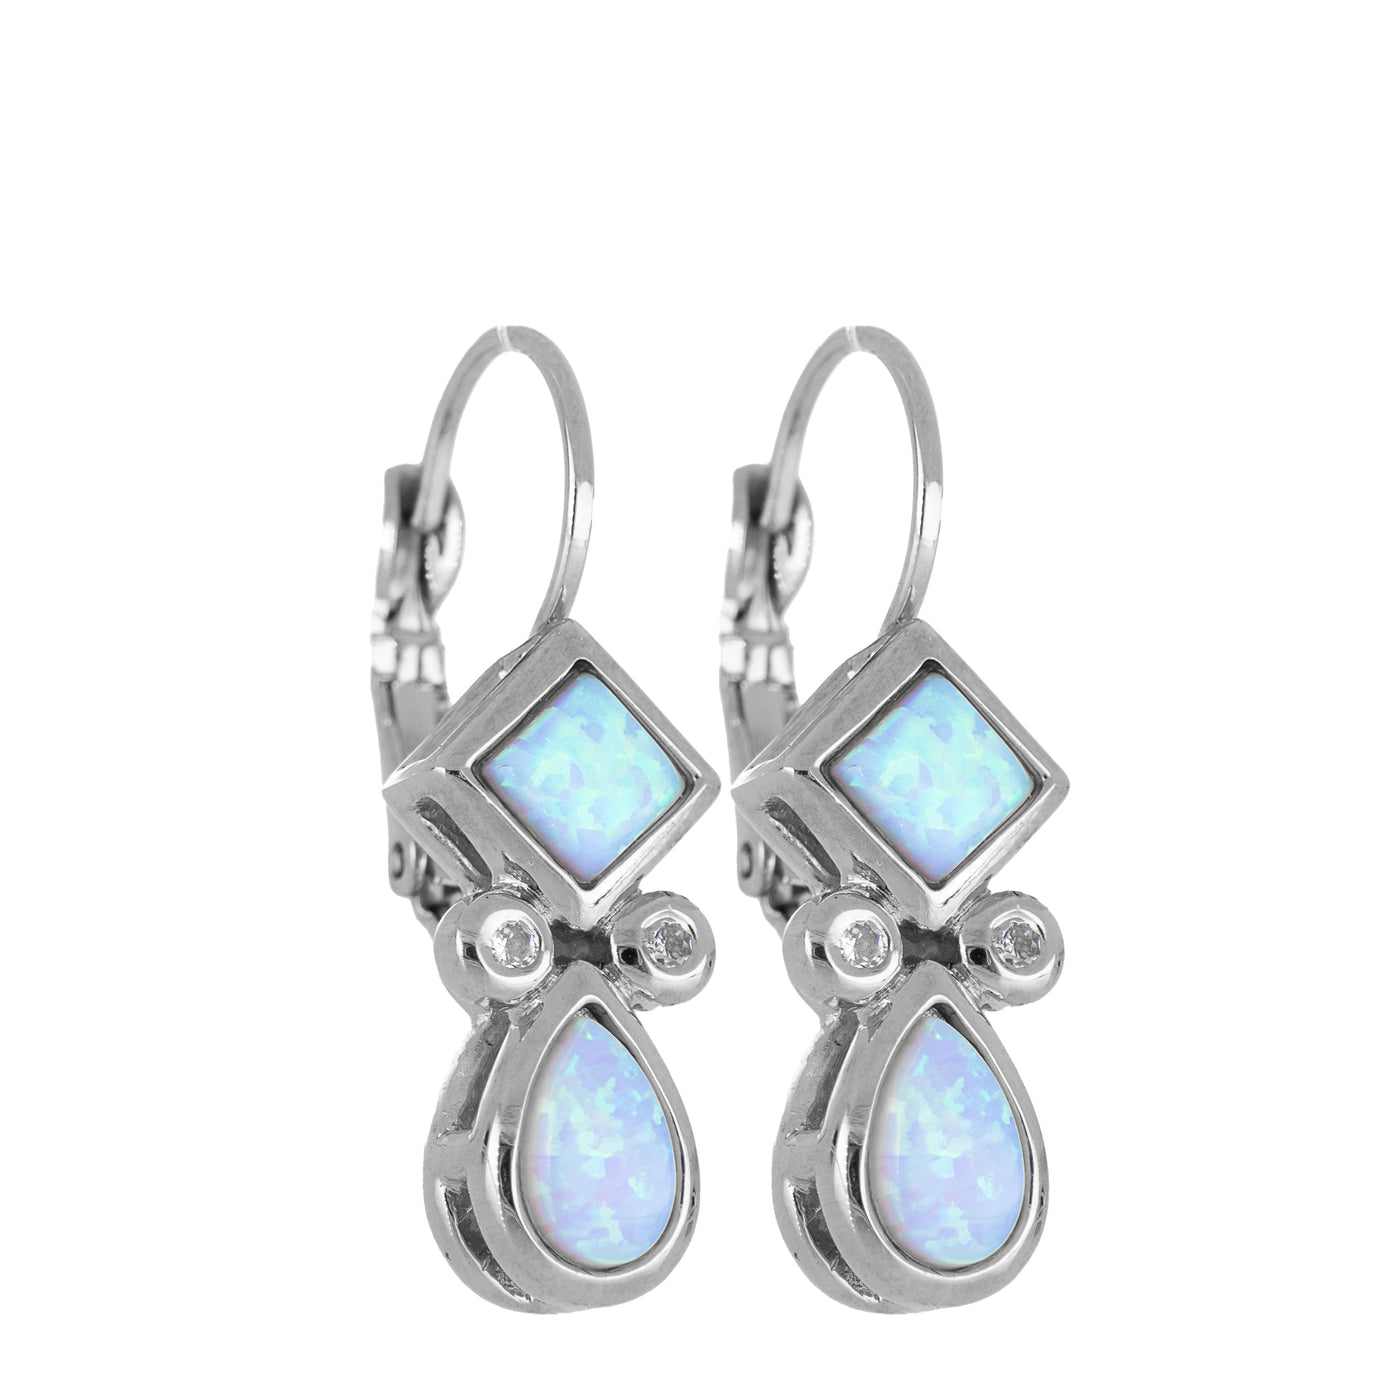 Opalas do Mar Collection - 2 Blue Opals French Wire Earrings